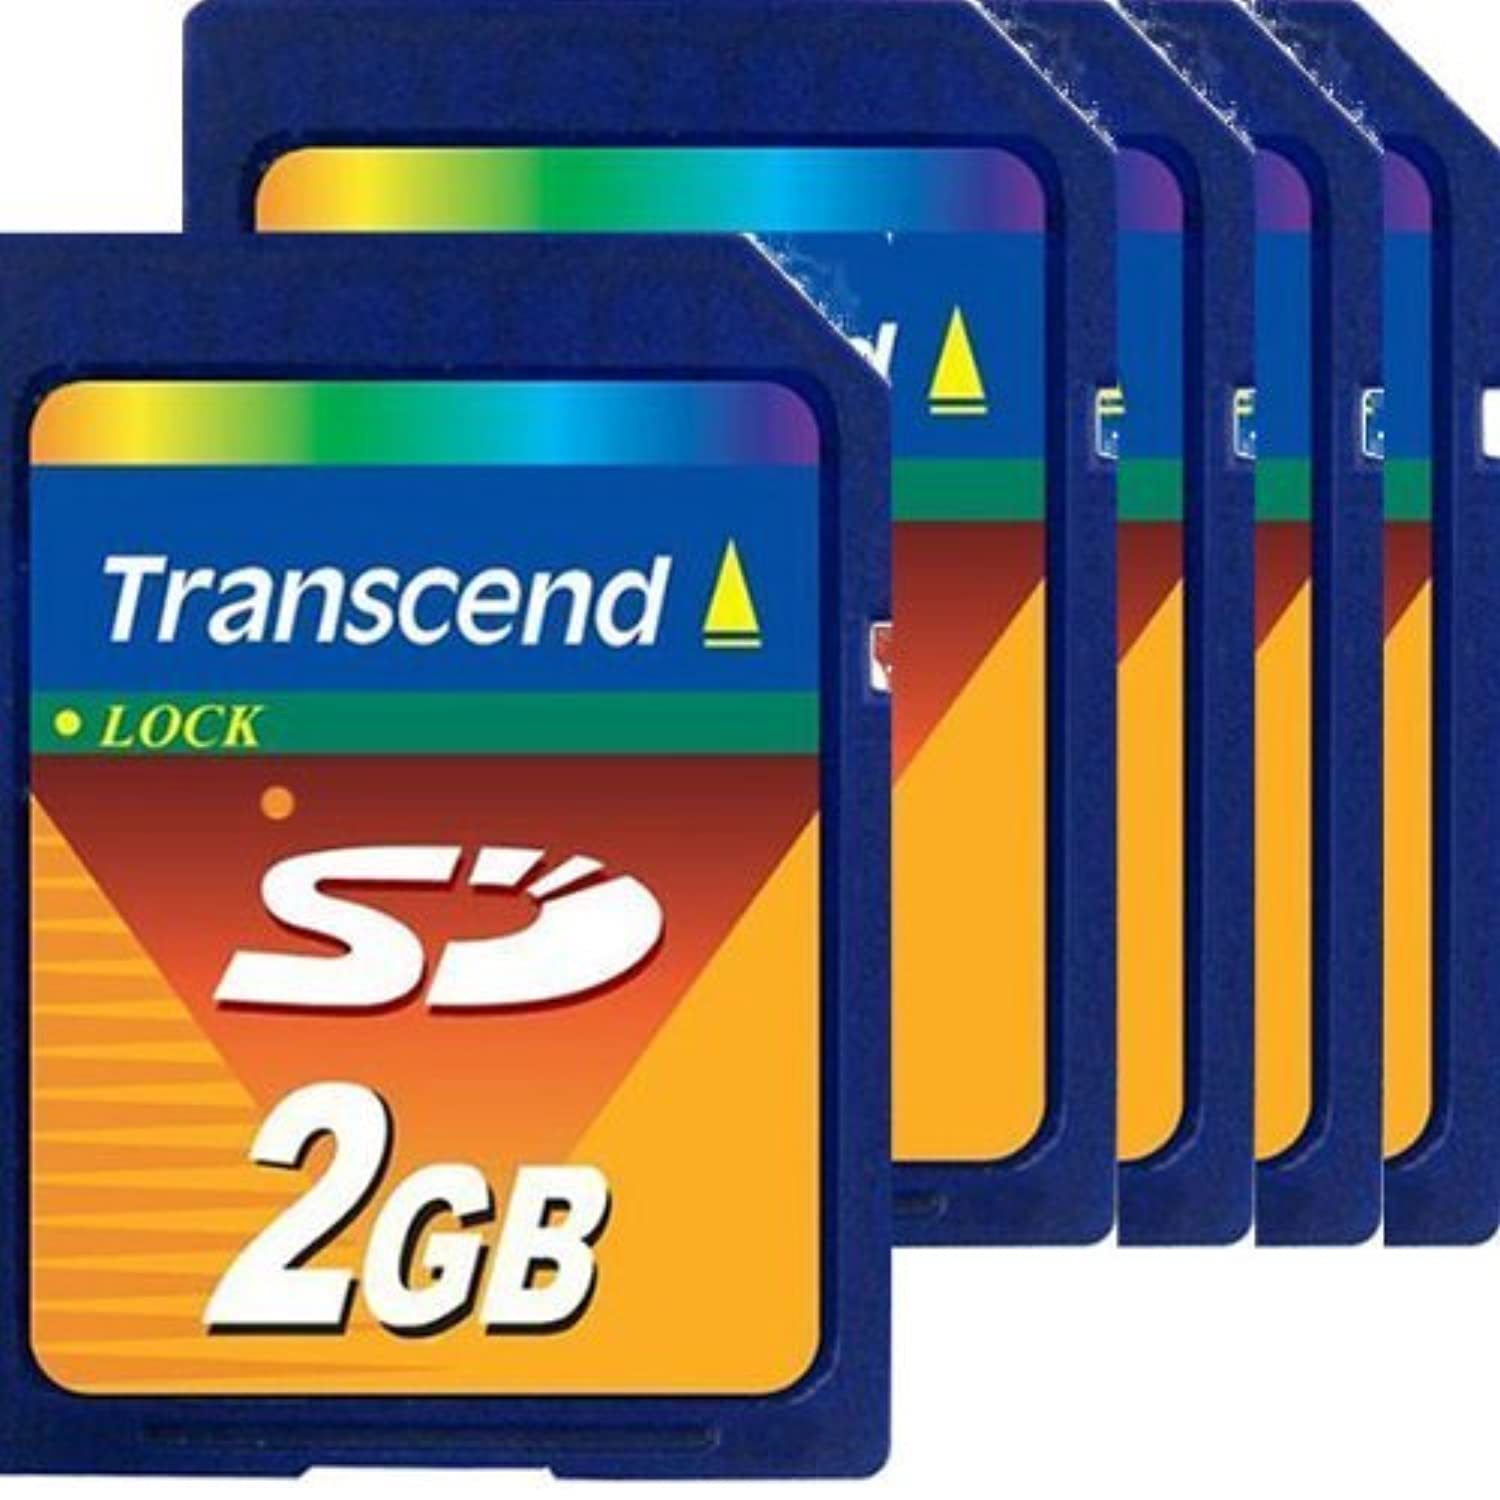 Transcend 2 GB SD Flash Memory Card (TS2GSDC) pack of 5 - $62.99